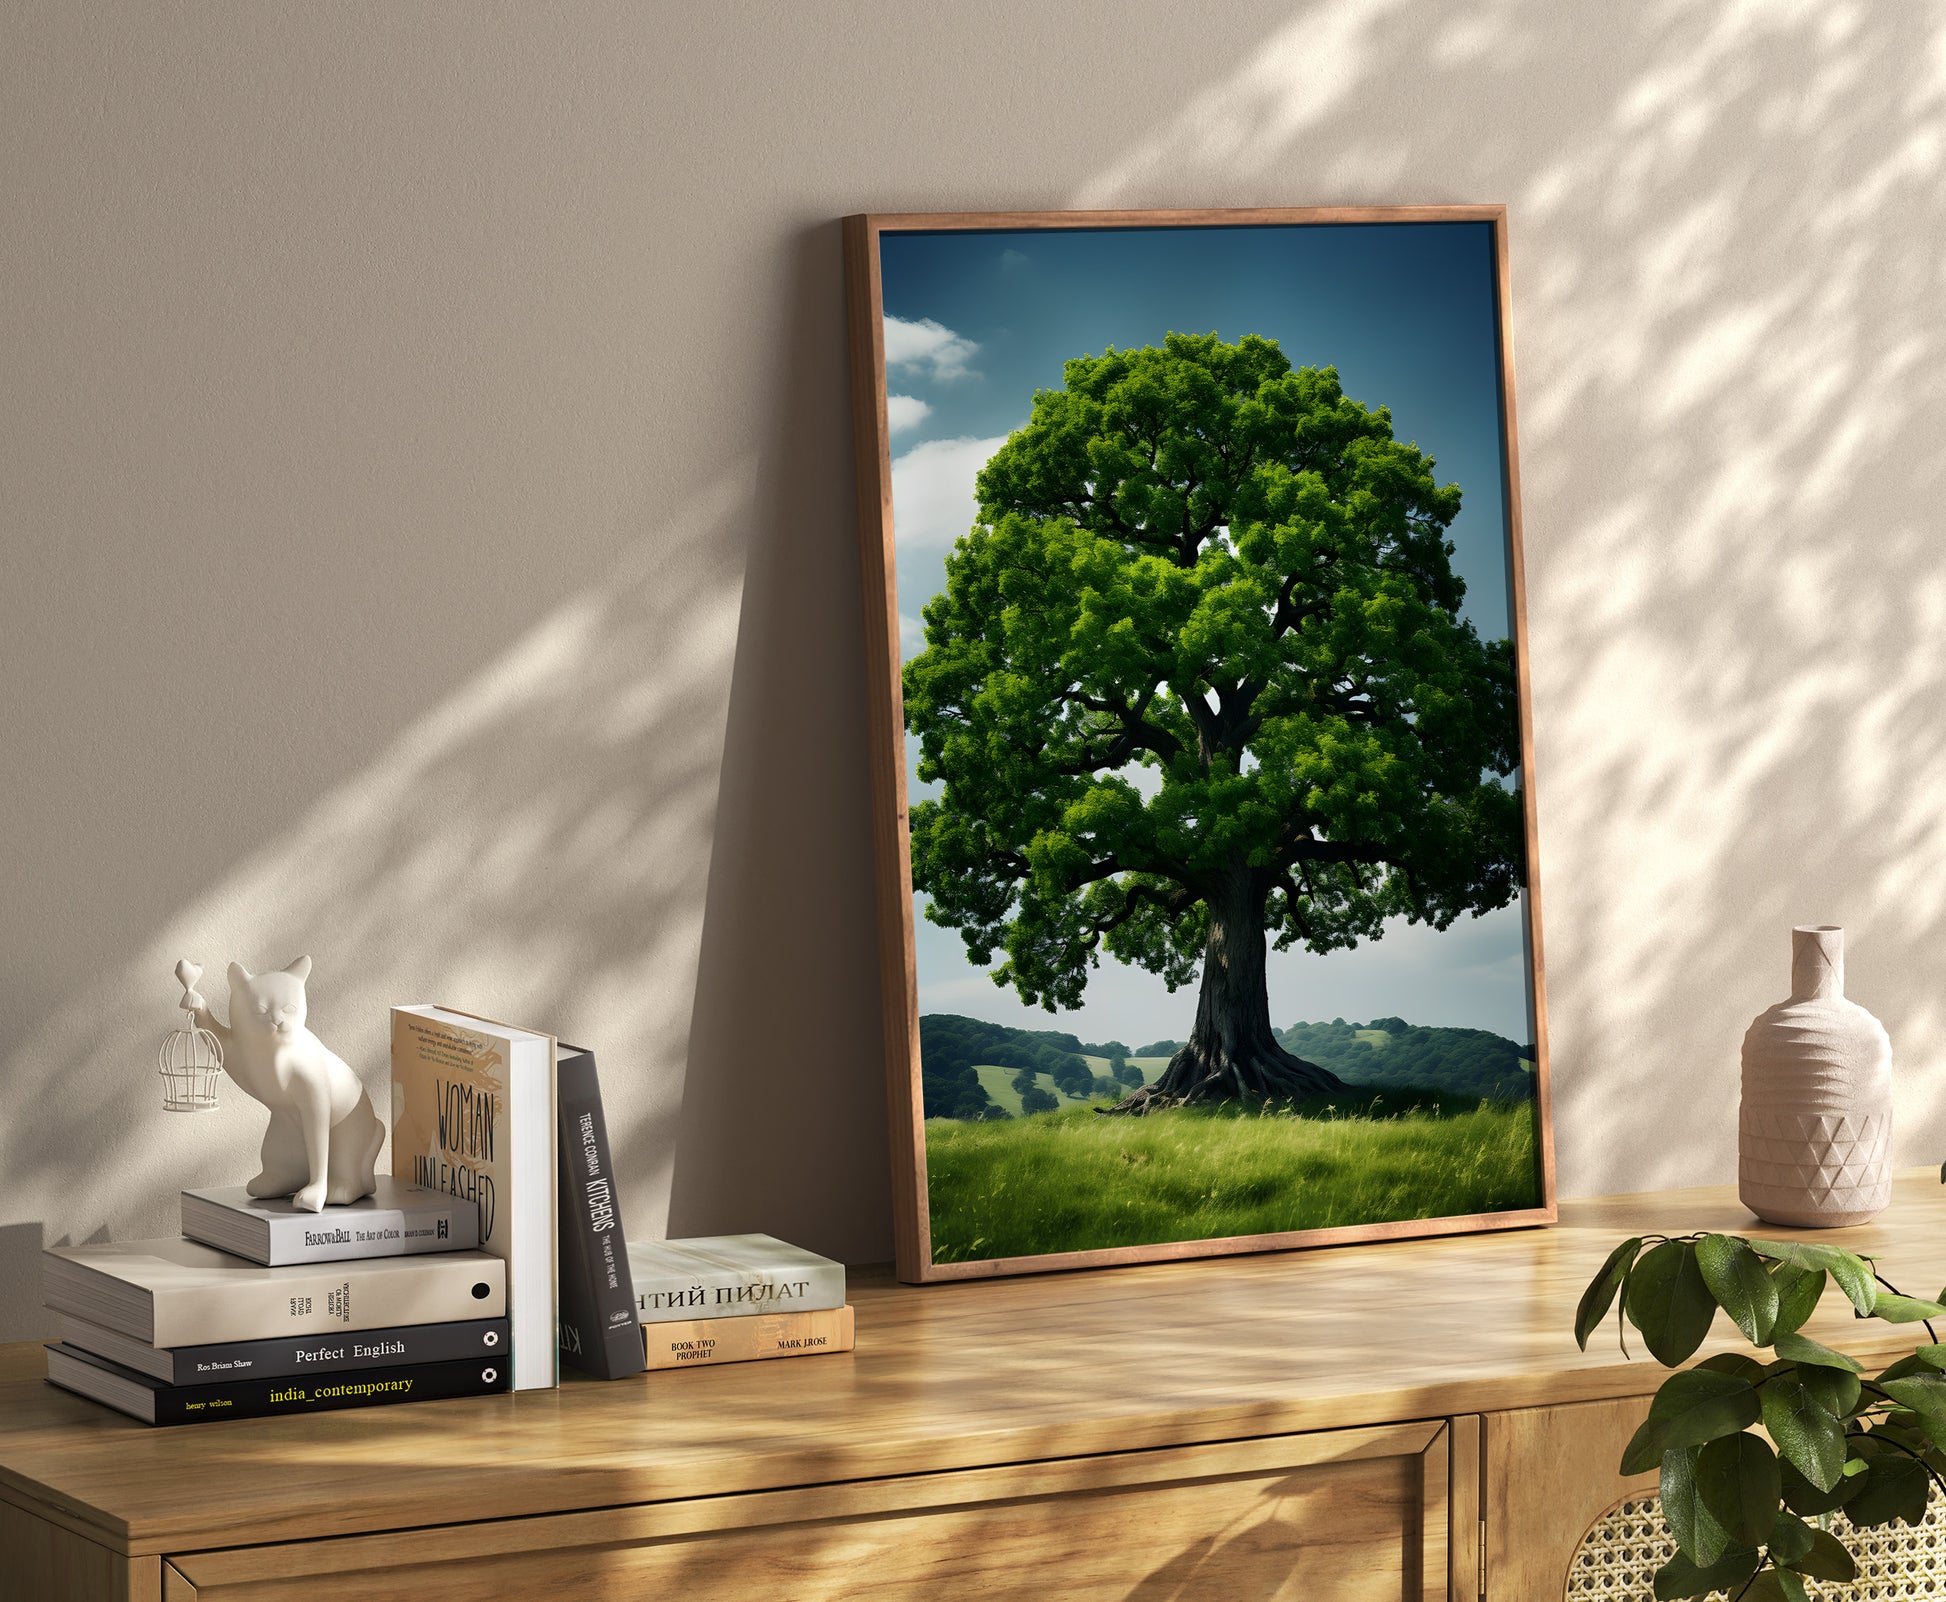 A framed picture of a tree leaning against a wall beside books and decorative items.